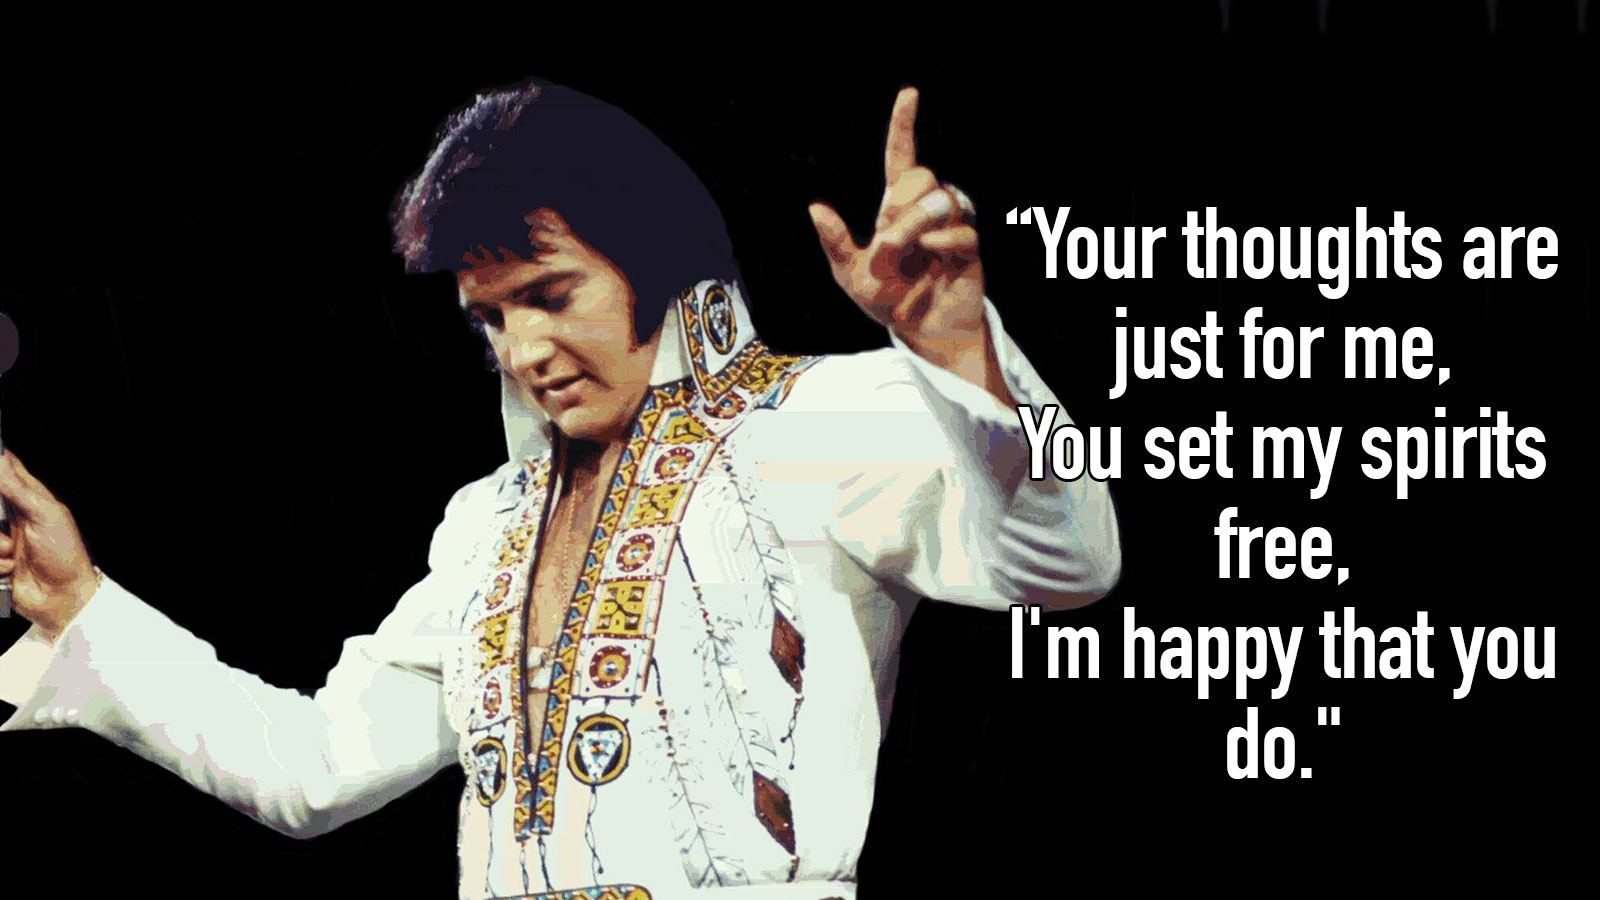 Can You Guess the Elvis Presley Song This Lyric Is From? Quiz 141